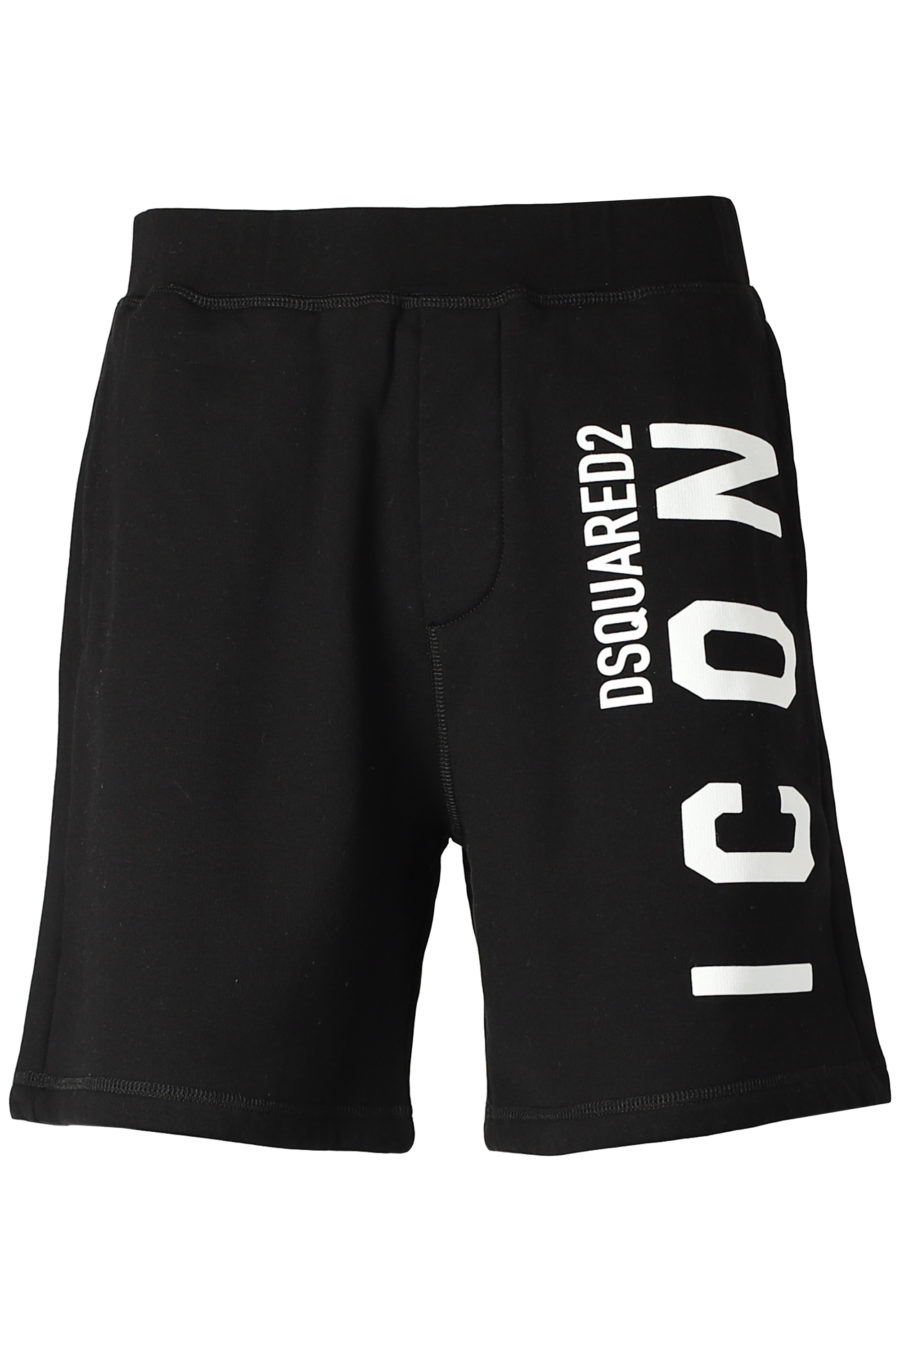 Black shorts with vertical "Icon" logo - IMG 2596